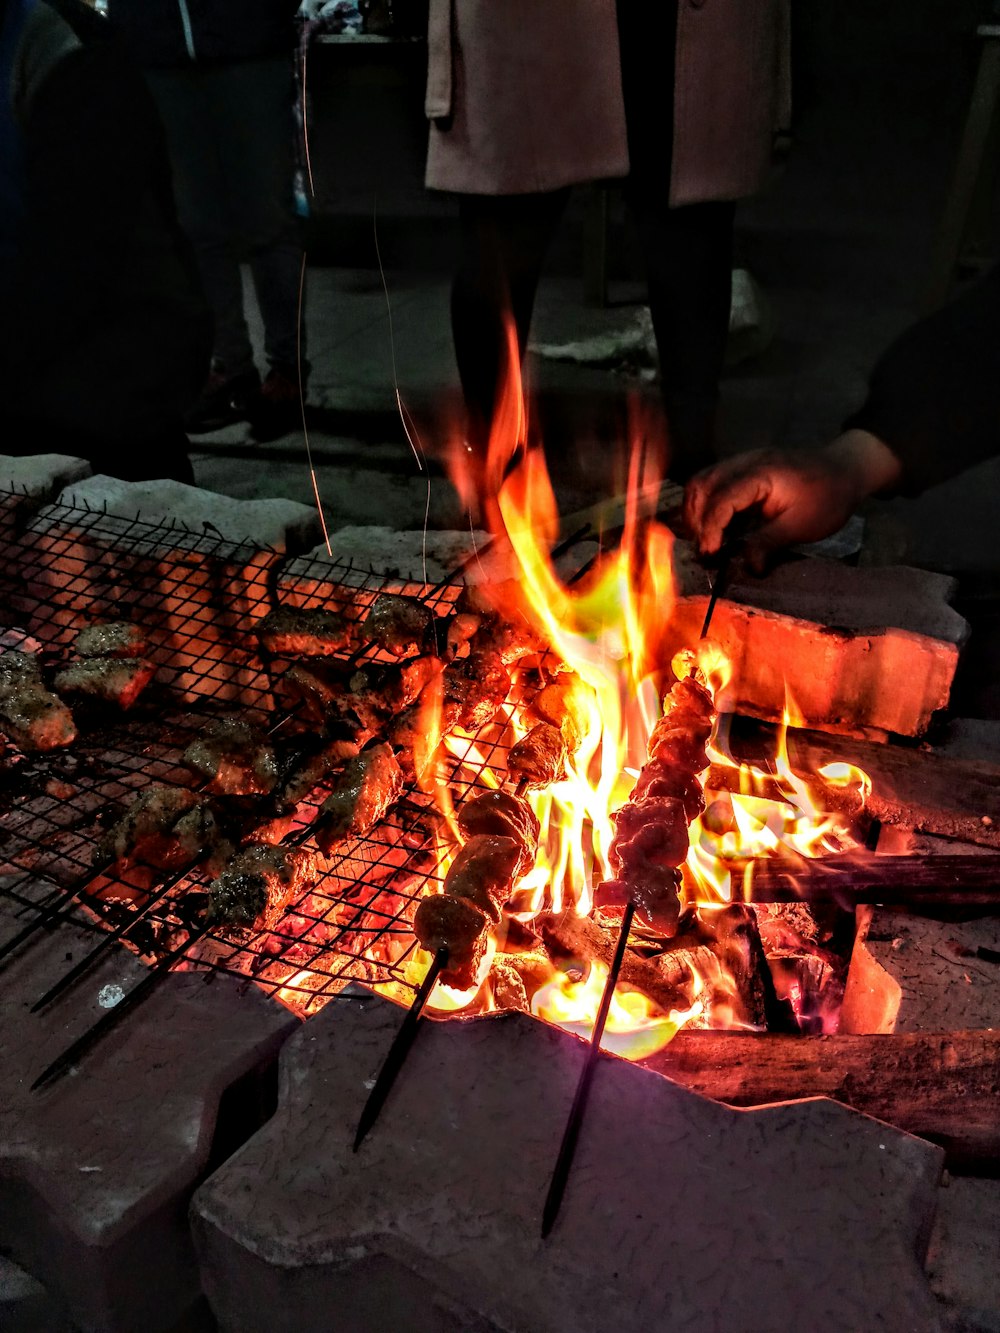 person grilling on bonfire surrounded by people